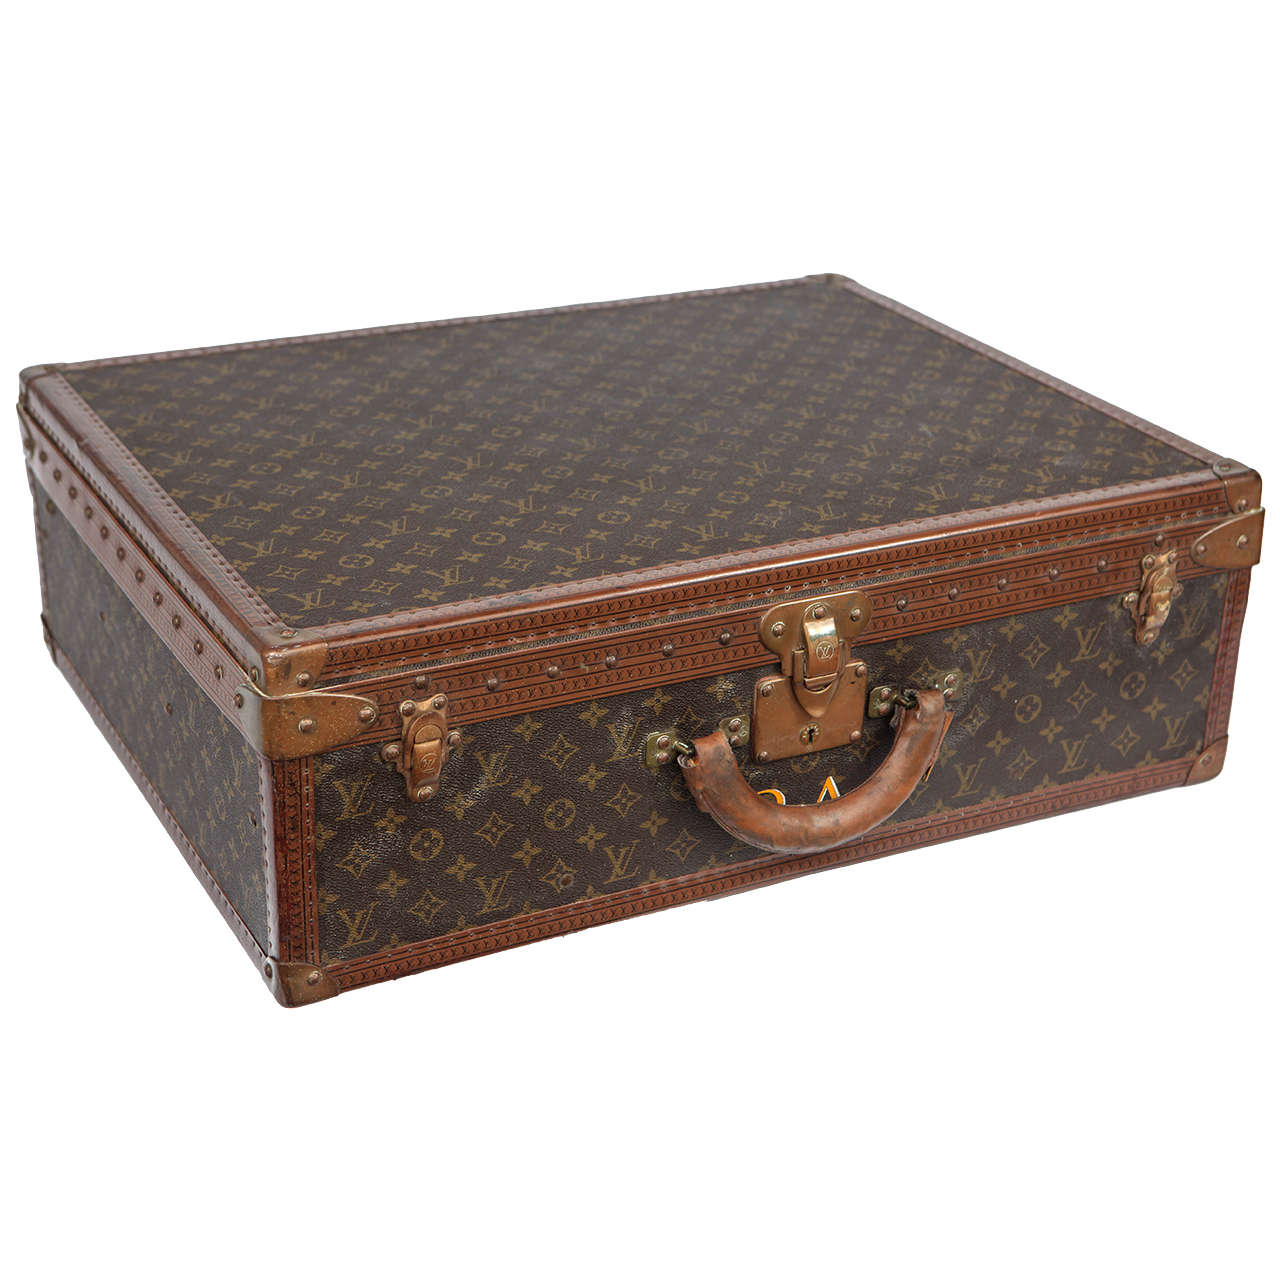 Vintage Louis Vuitton Hard Case Luggage / sold at auction on 10th July